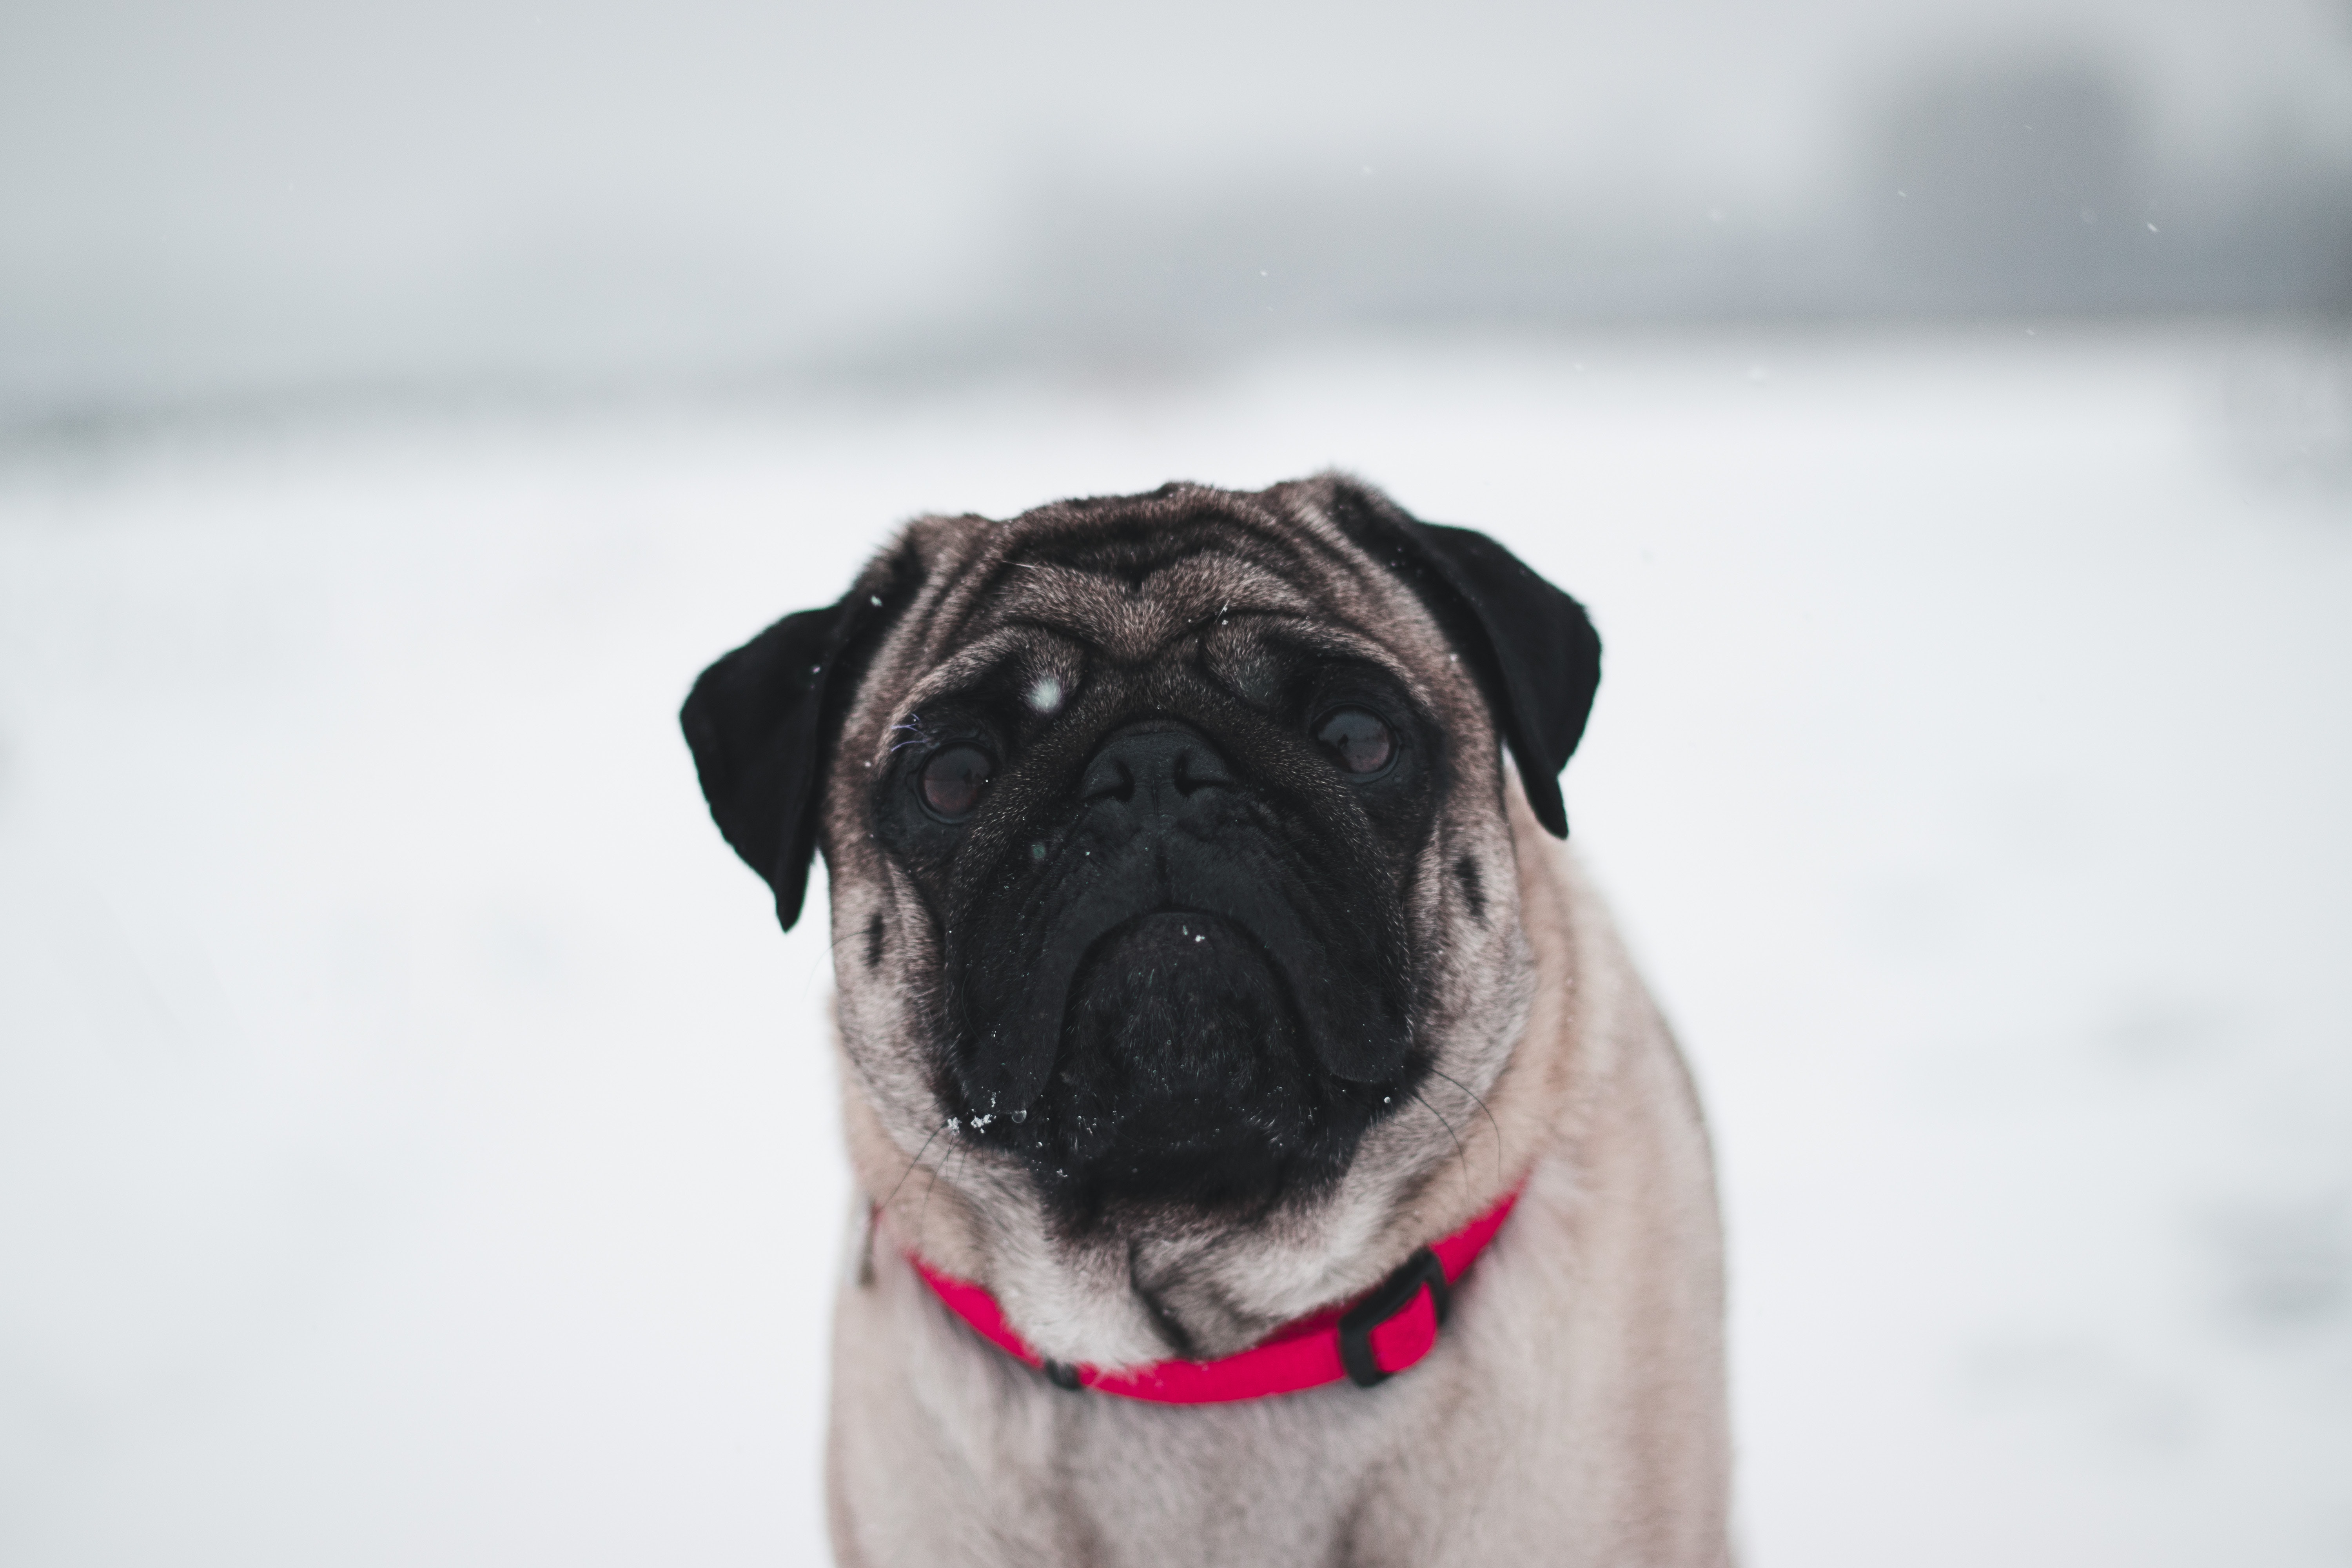 A Chinese fawn pug wearing a red collar standing on a snow